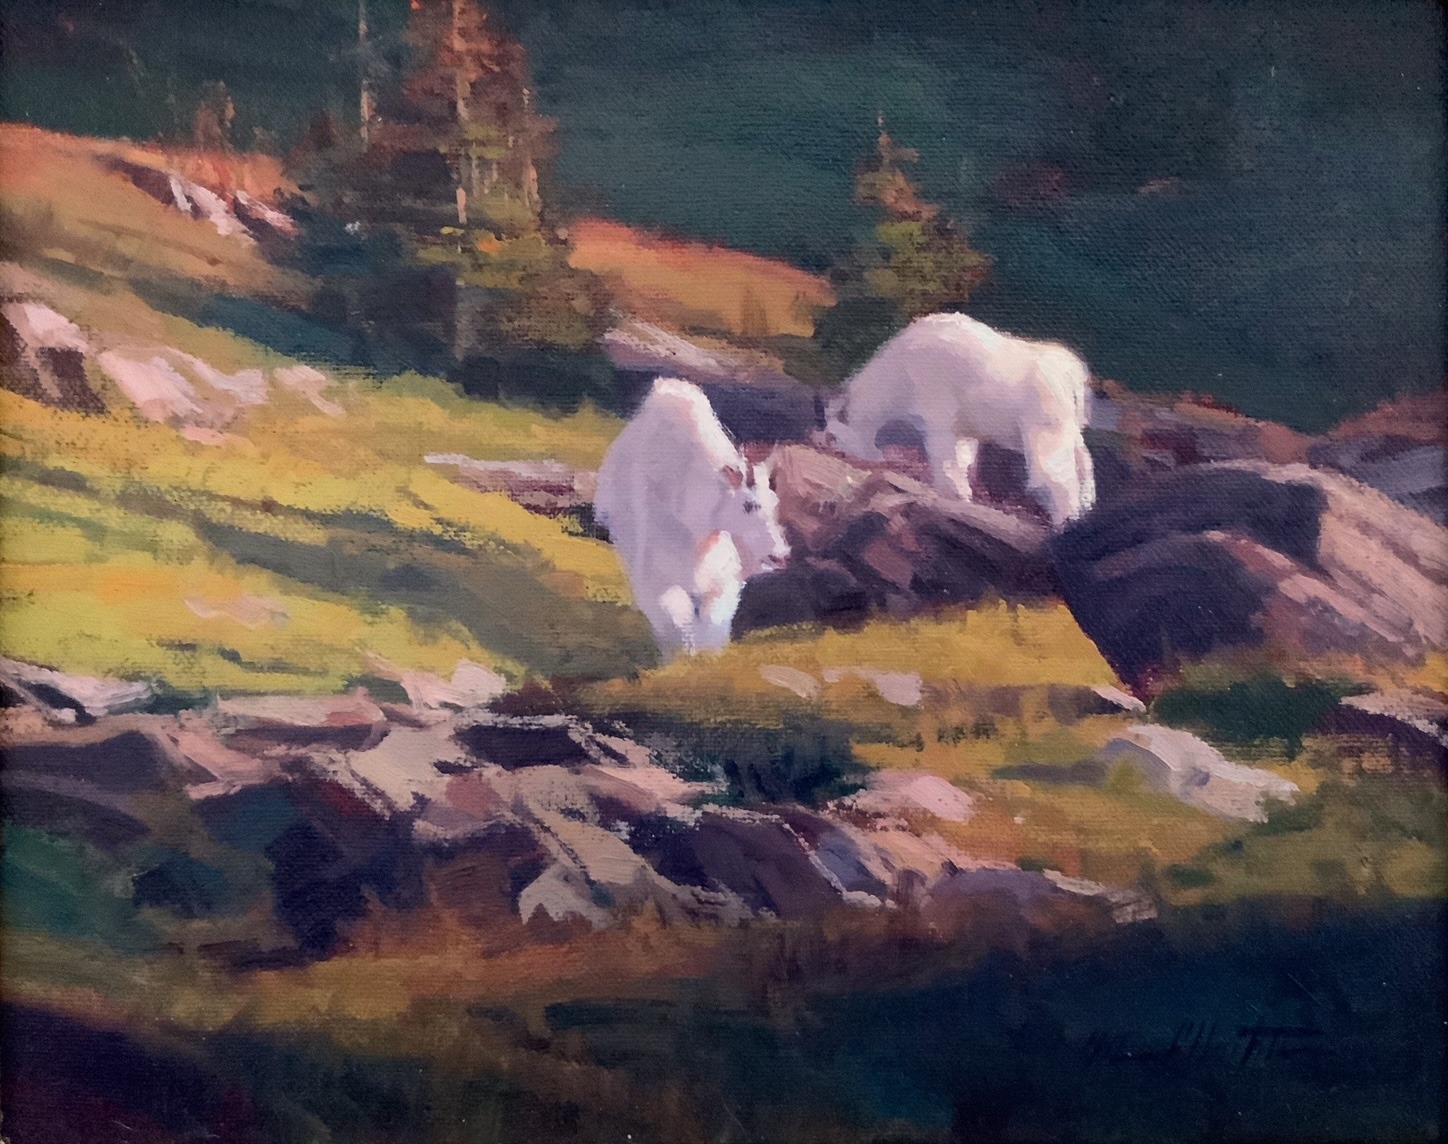 An oil painting of an afternoon mountain scene with two mountain goats grazing amongst the rocks and pine trees